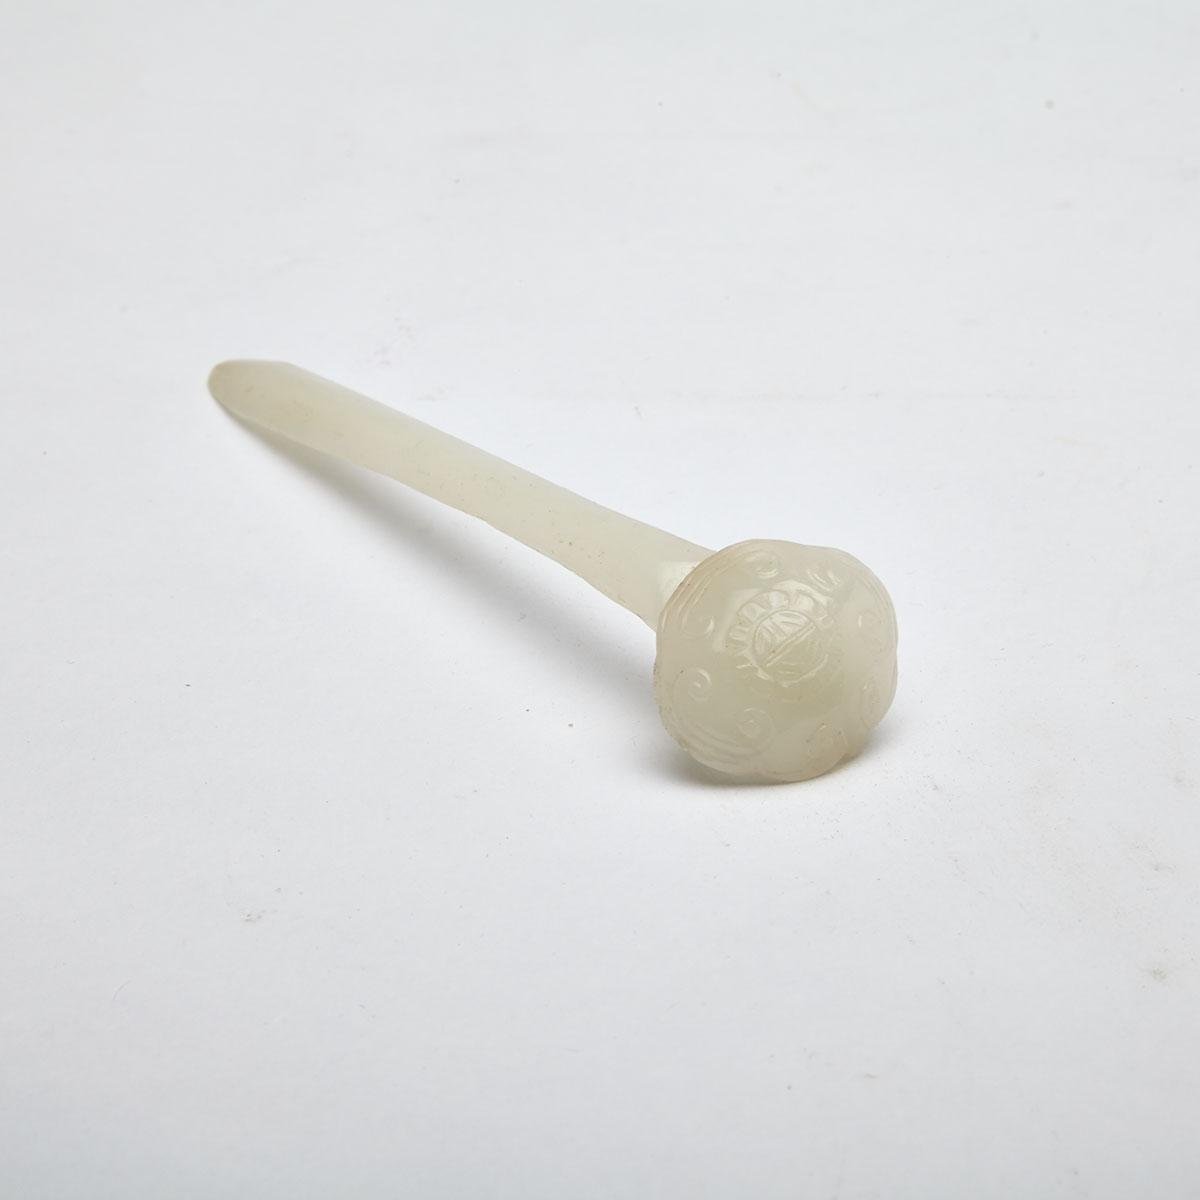 Pale Celadon Jade Hairpin, Late Qing Dynasty